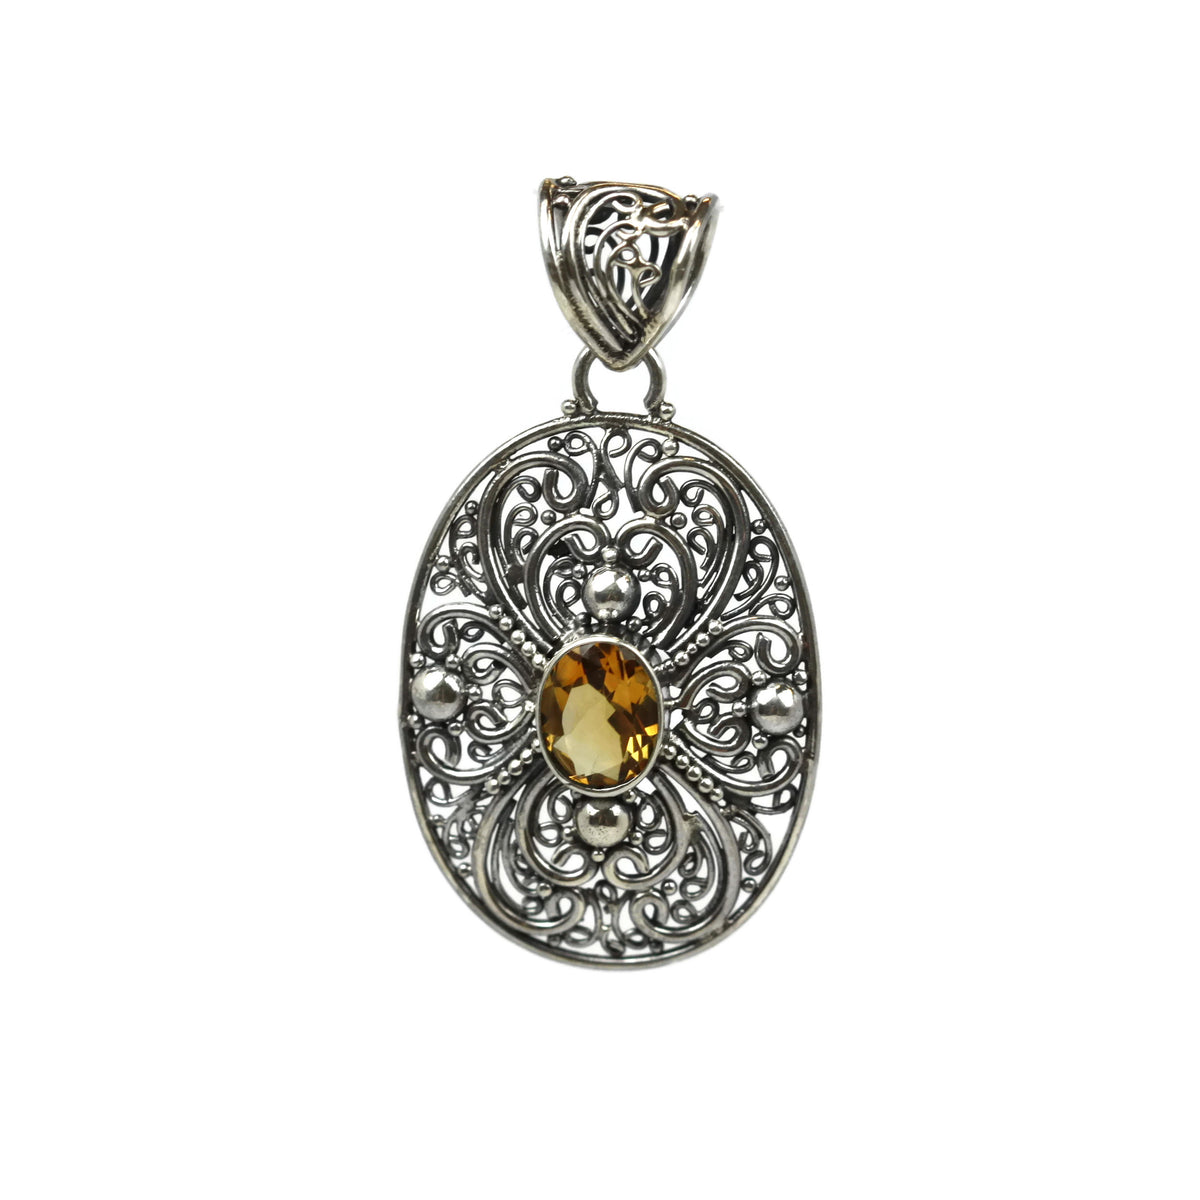 Handmade 925 Sterling Silver Antique Decorative Pendant With Oval Faceted Citrine Gemstone